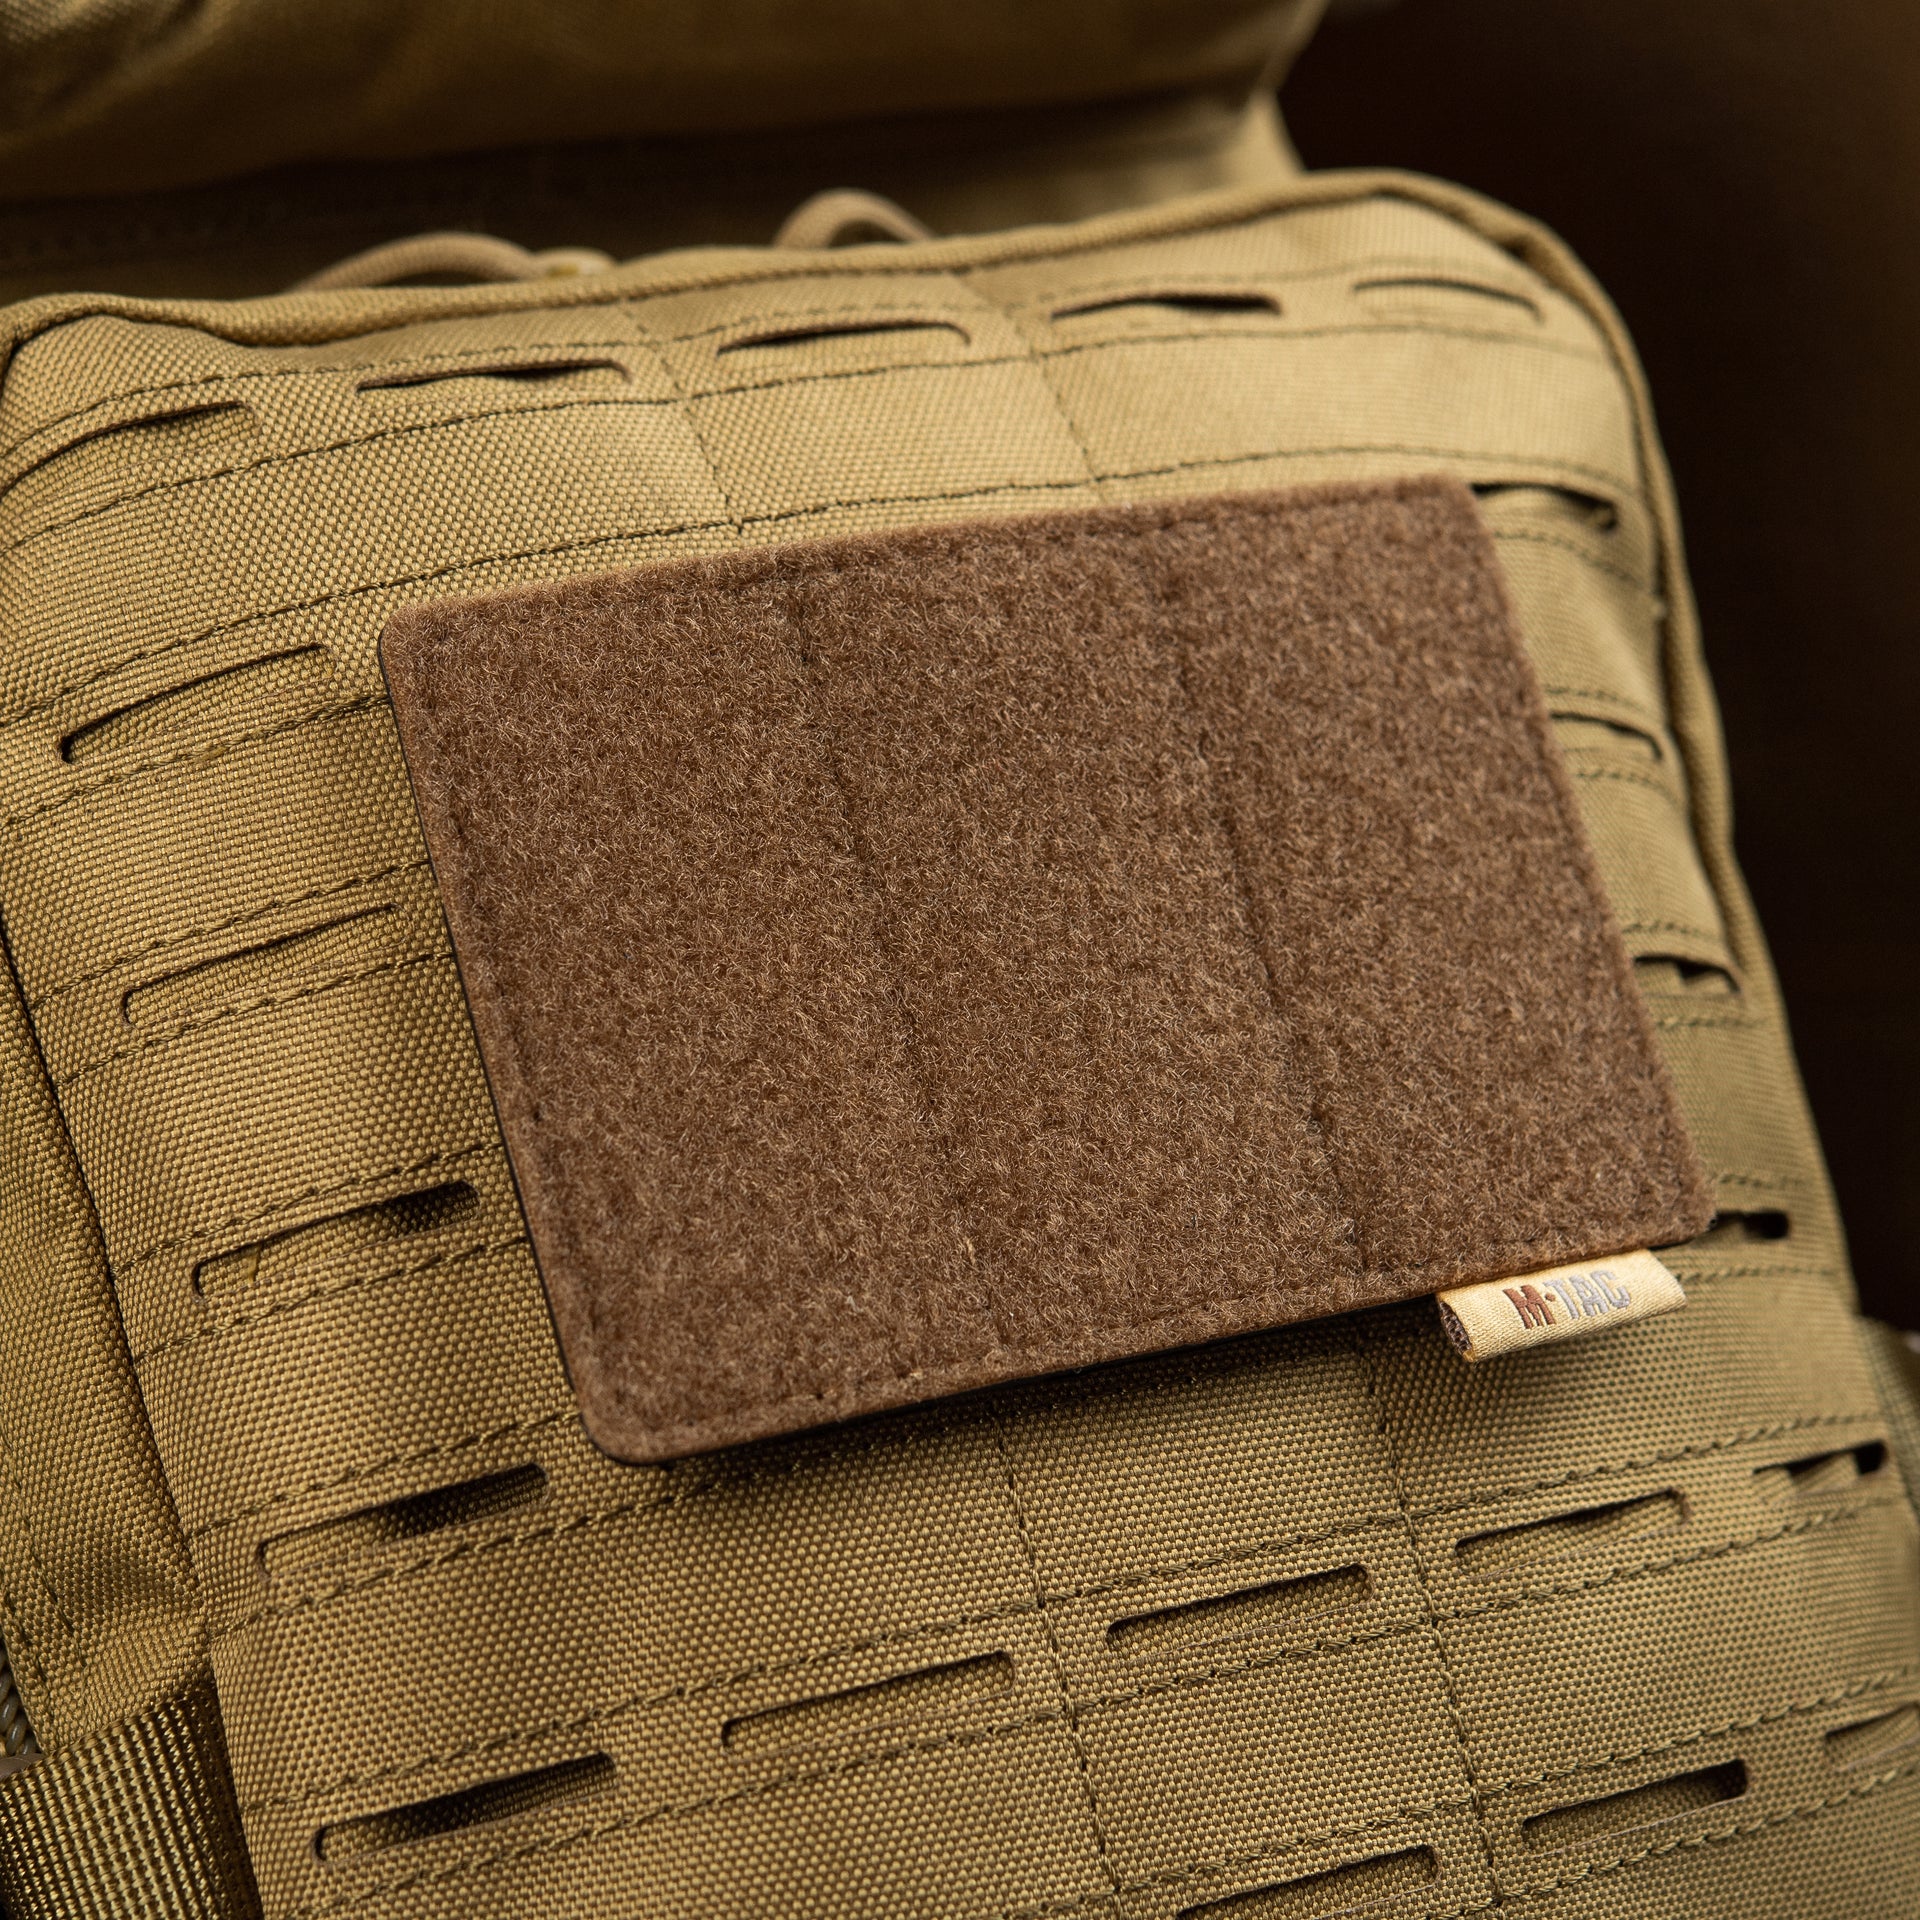 Chase Tactical MOLLE Hook & Loop Placard • Chase Tactical